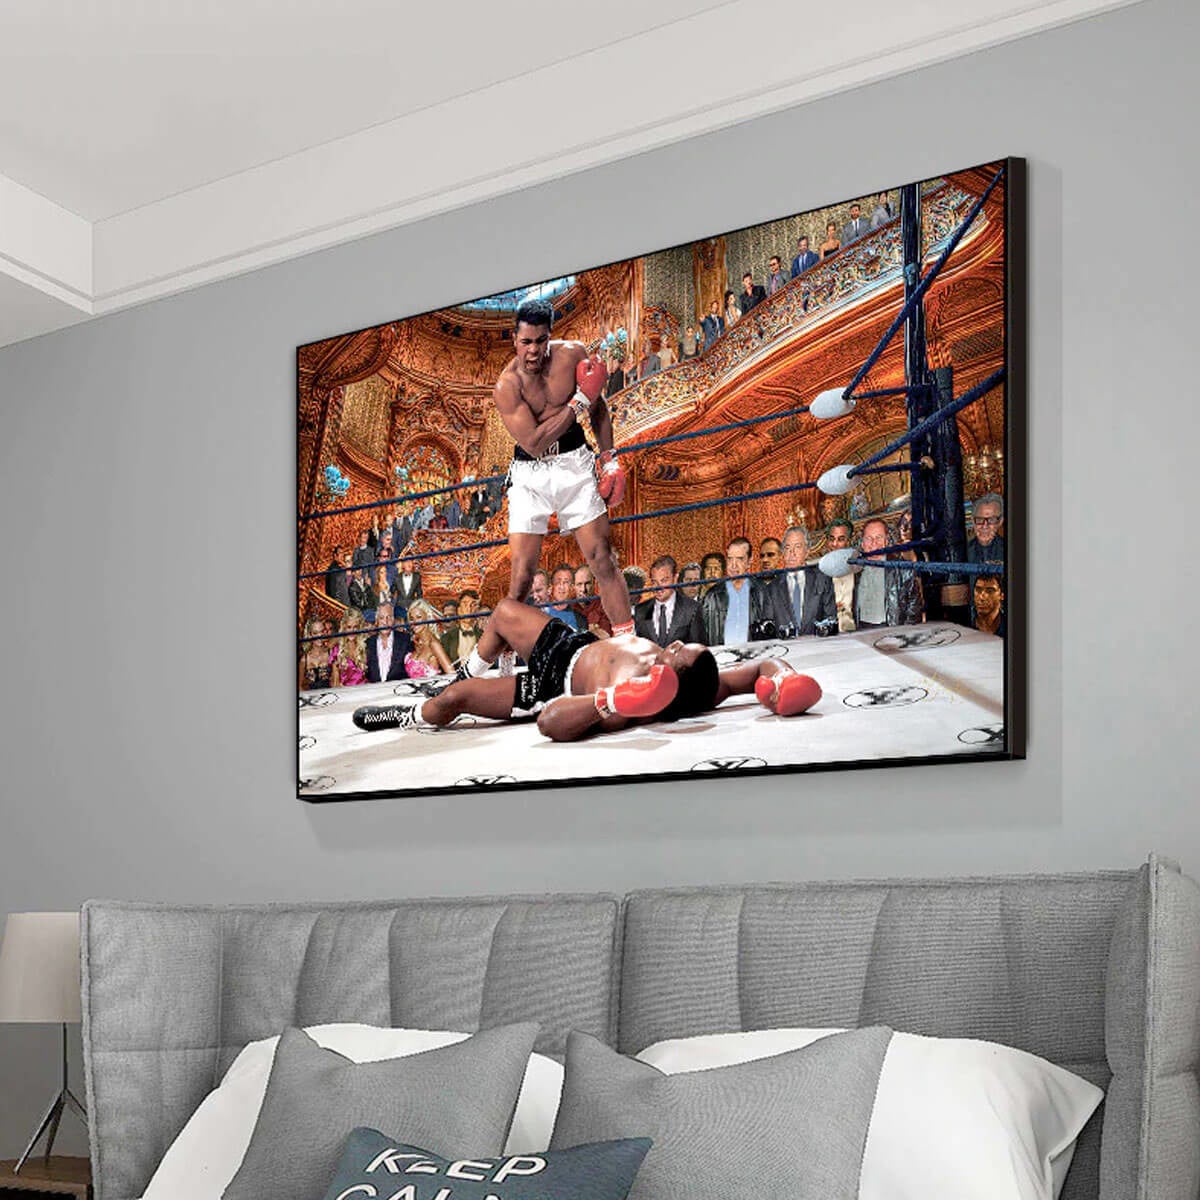 The Best Boxer of All Time Fightclub Art Canvas Painting Print Wall Art